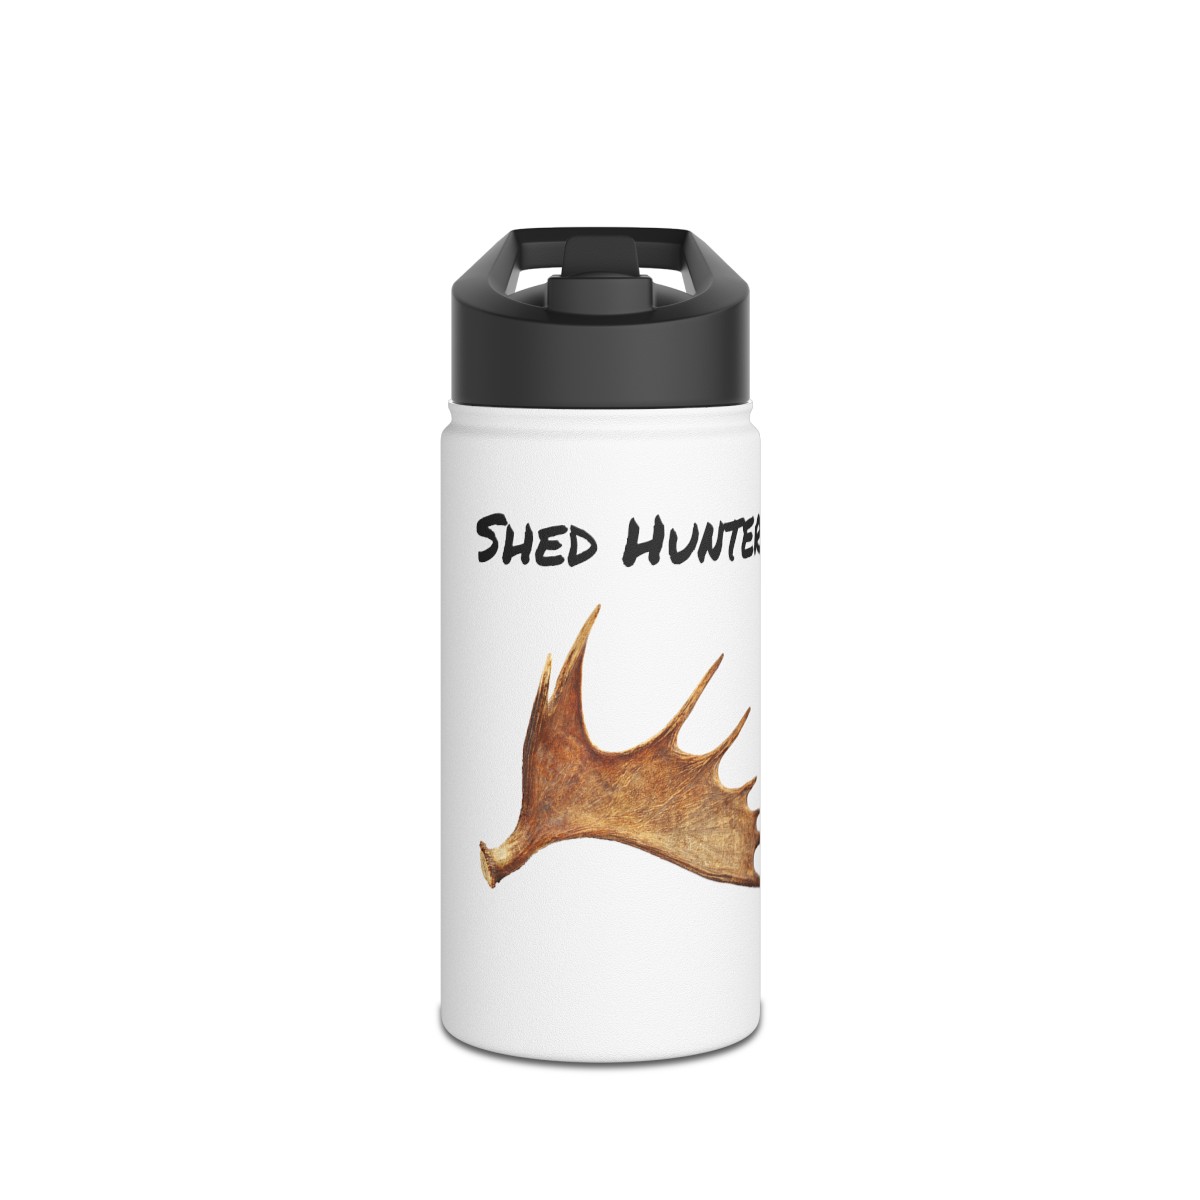 Stainless Steel Water Bottle, Standard Lid product thumbnail image